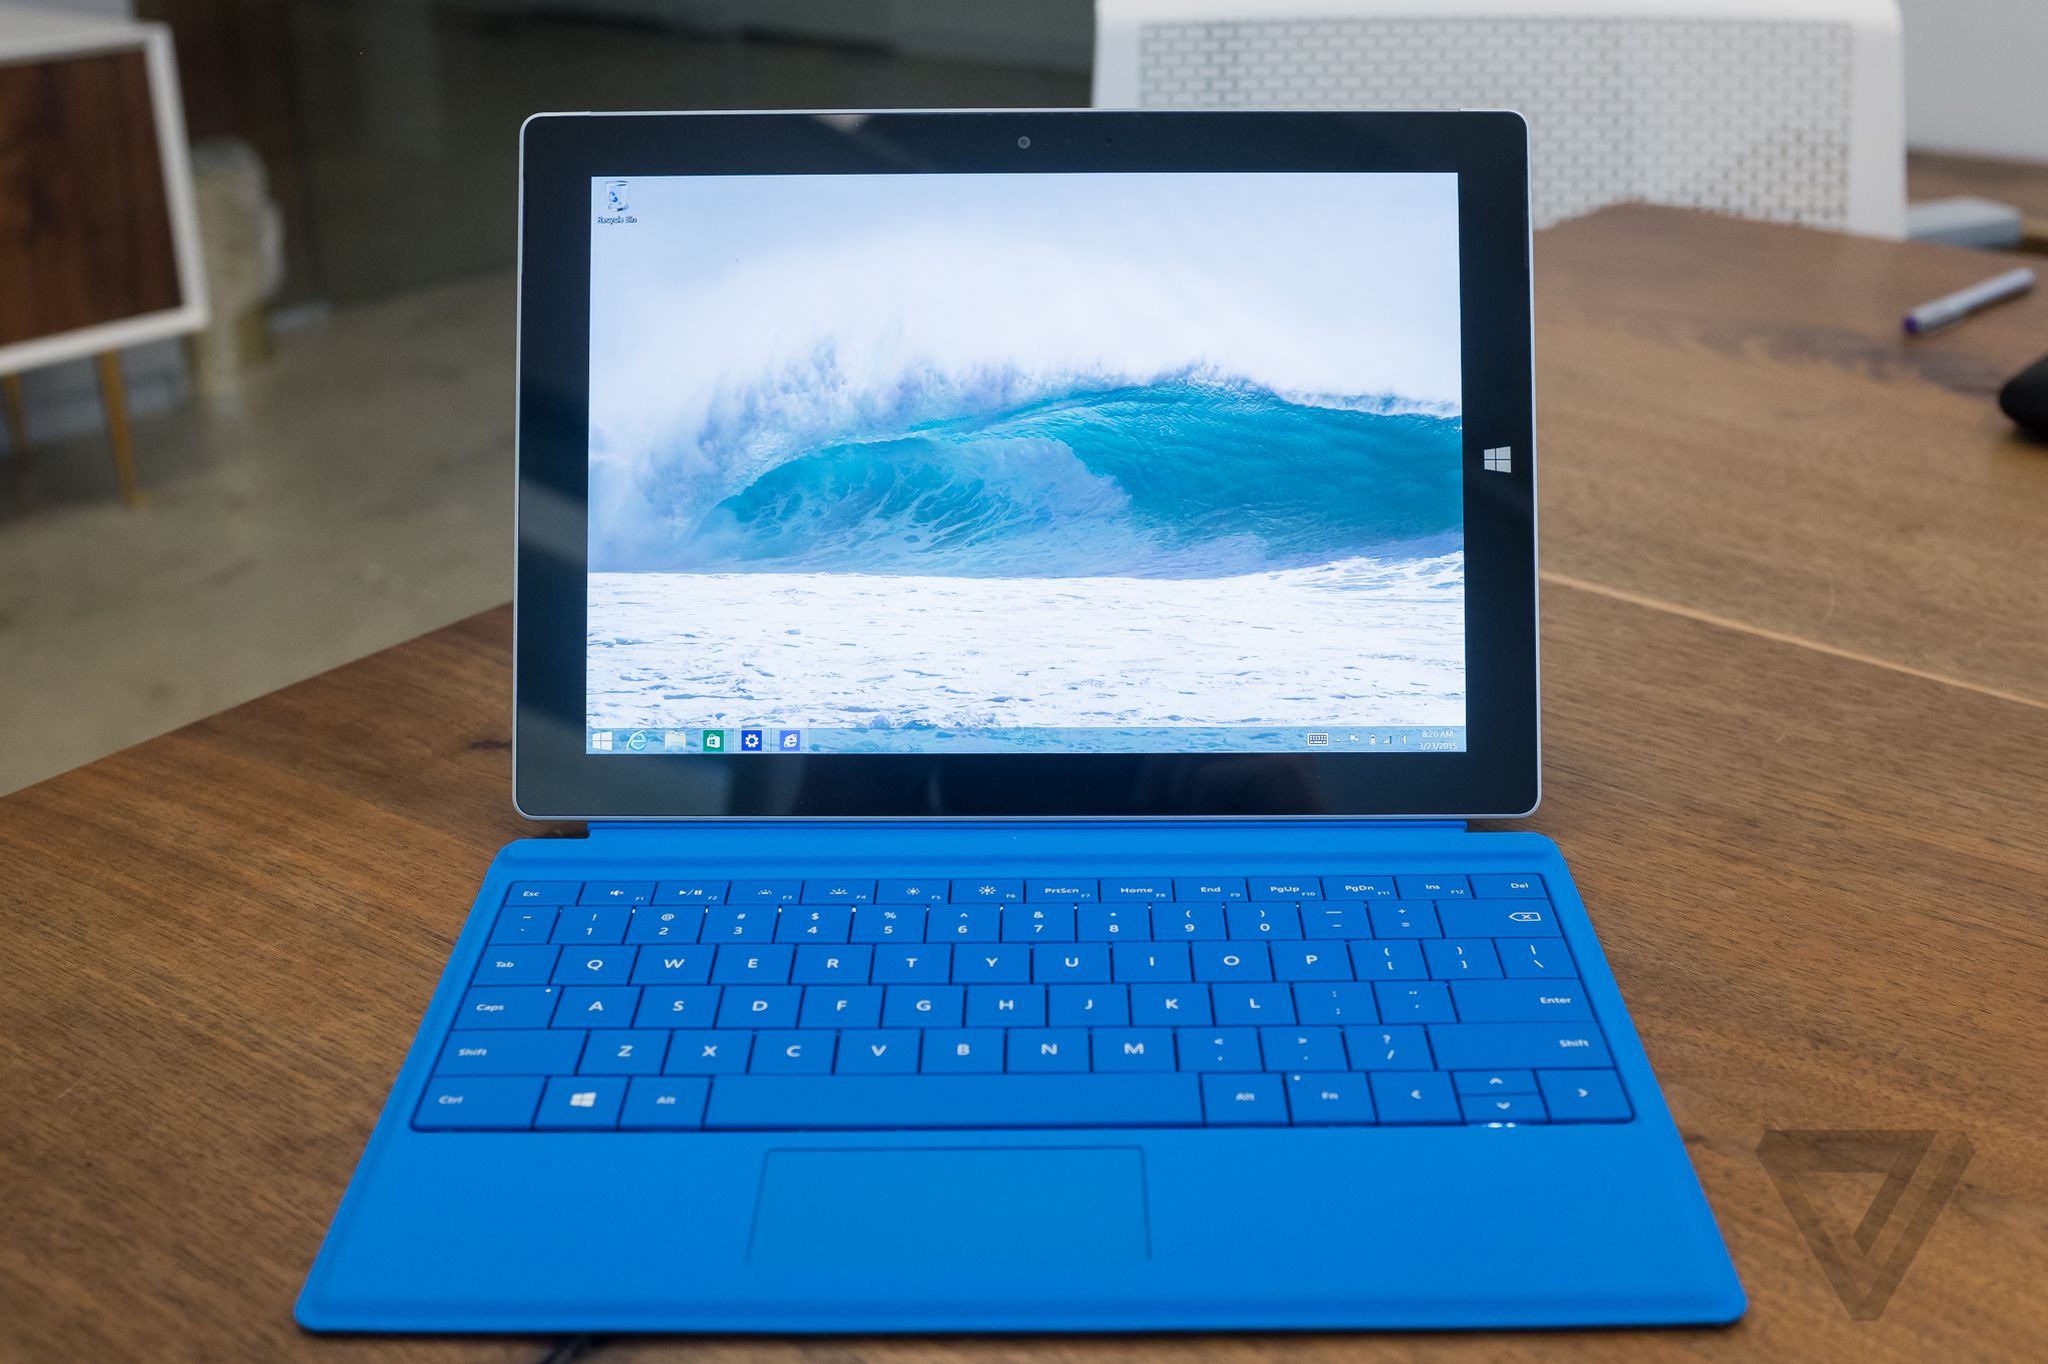 Microsofts Surface 3 Is A 499 Tablet That Could Be A Full Windows